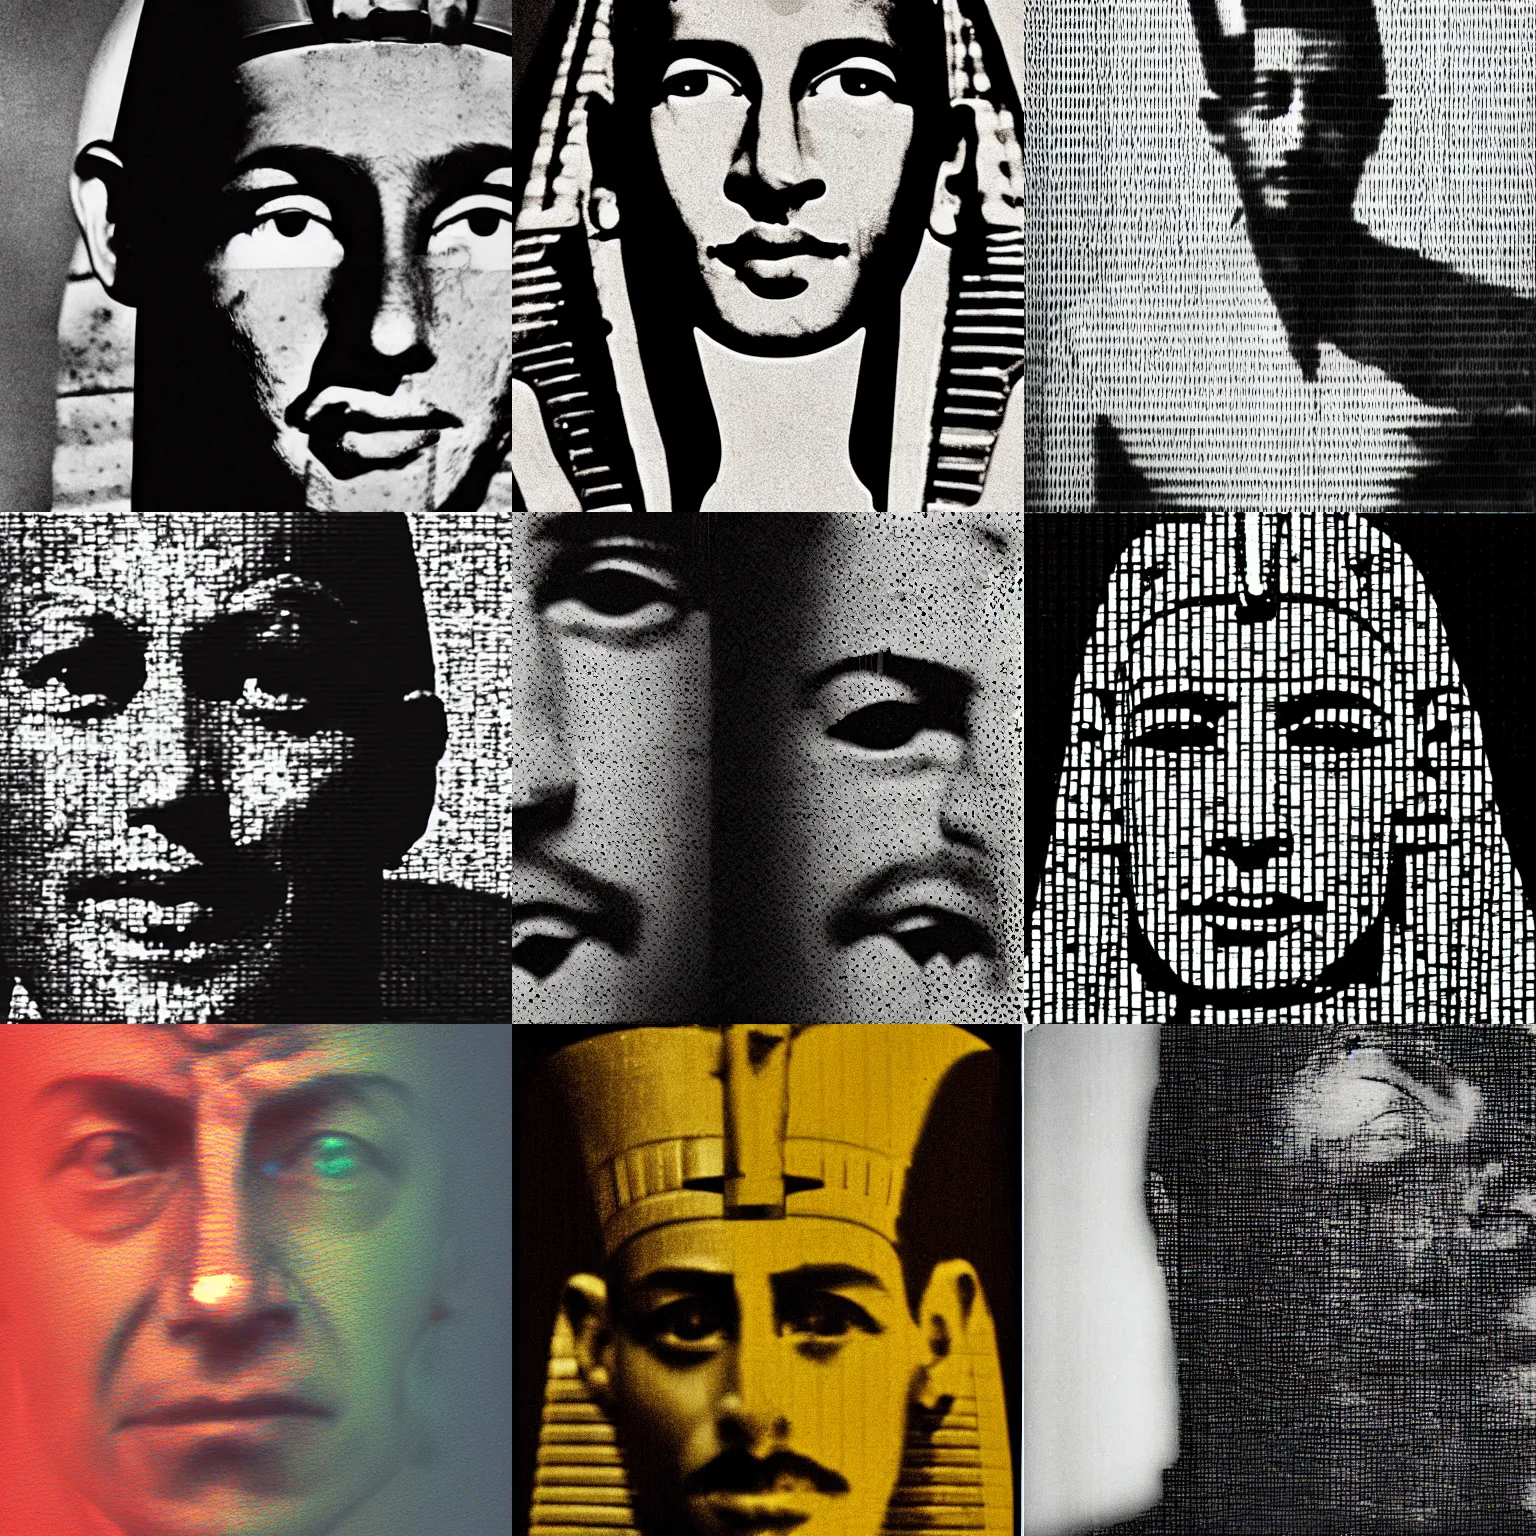 Prompt: close up portrait of a pharaoh, by bruce gilden and trent parke, old film glitch overlay